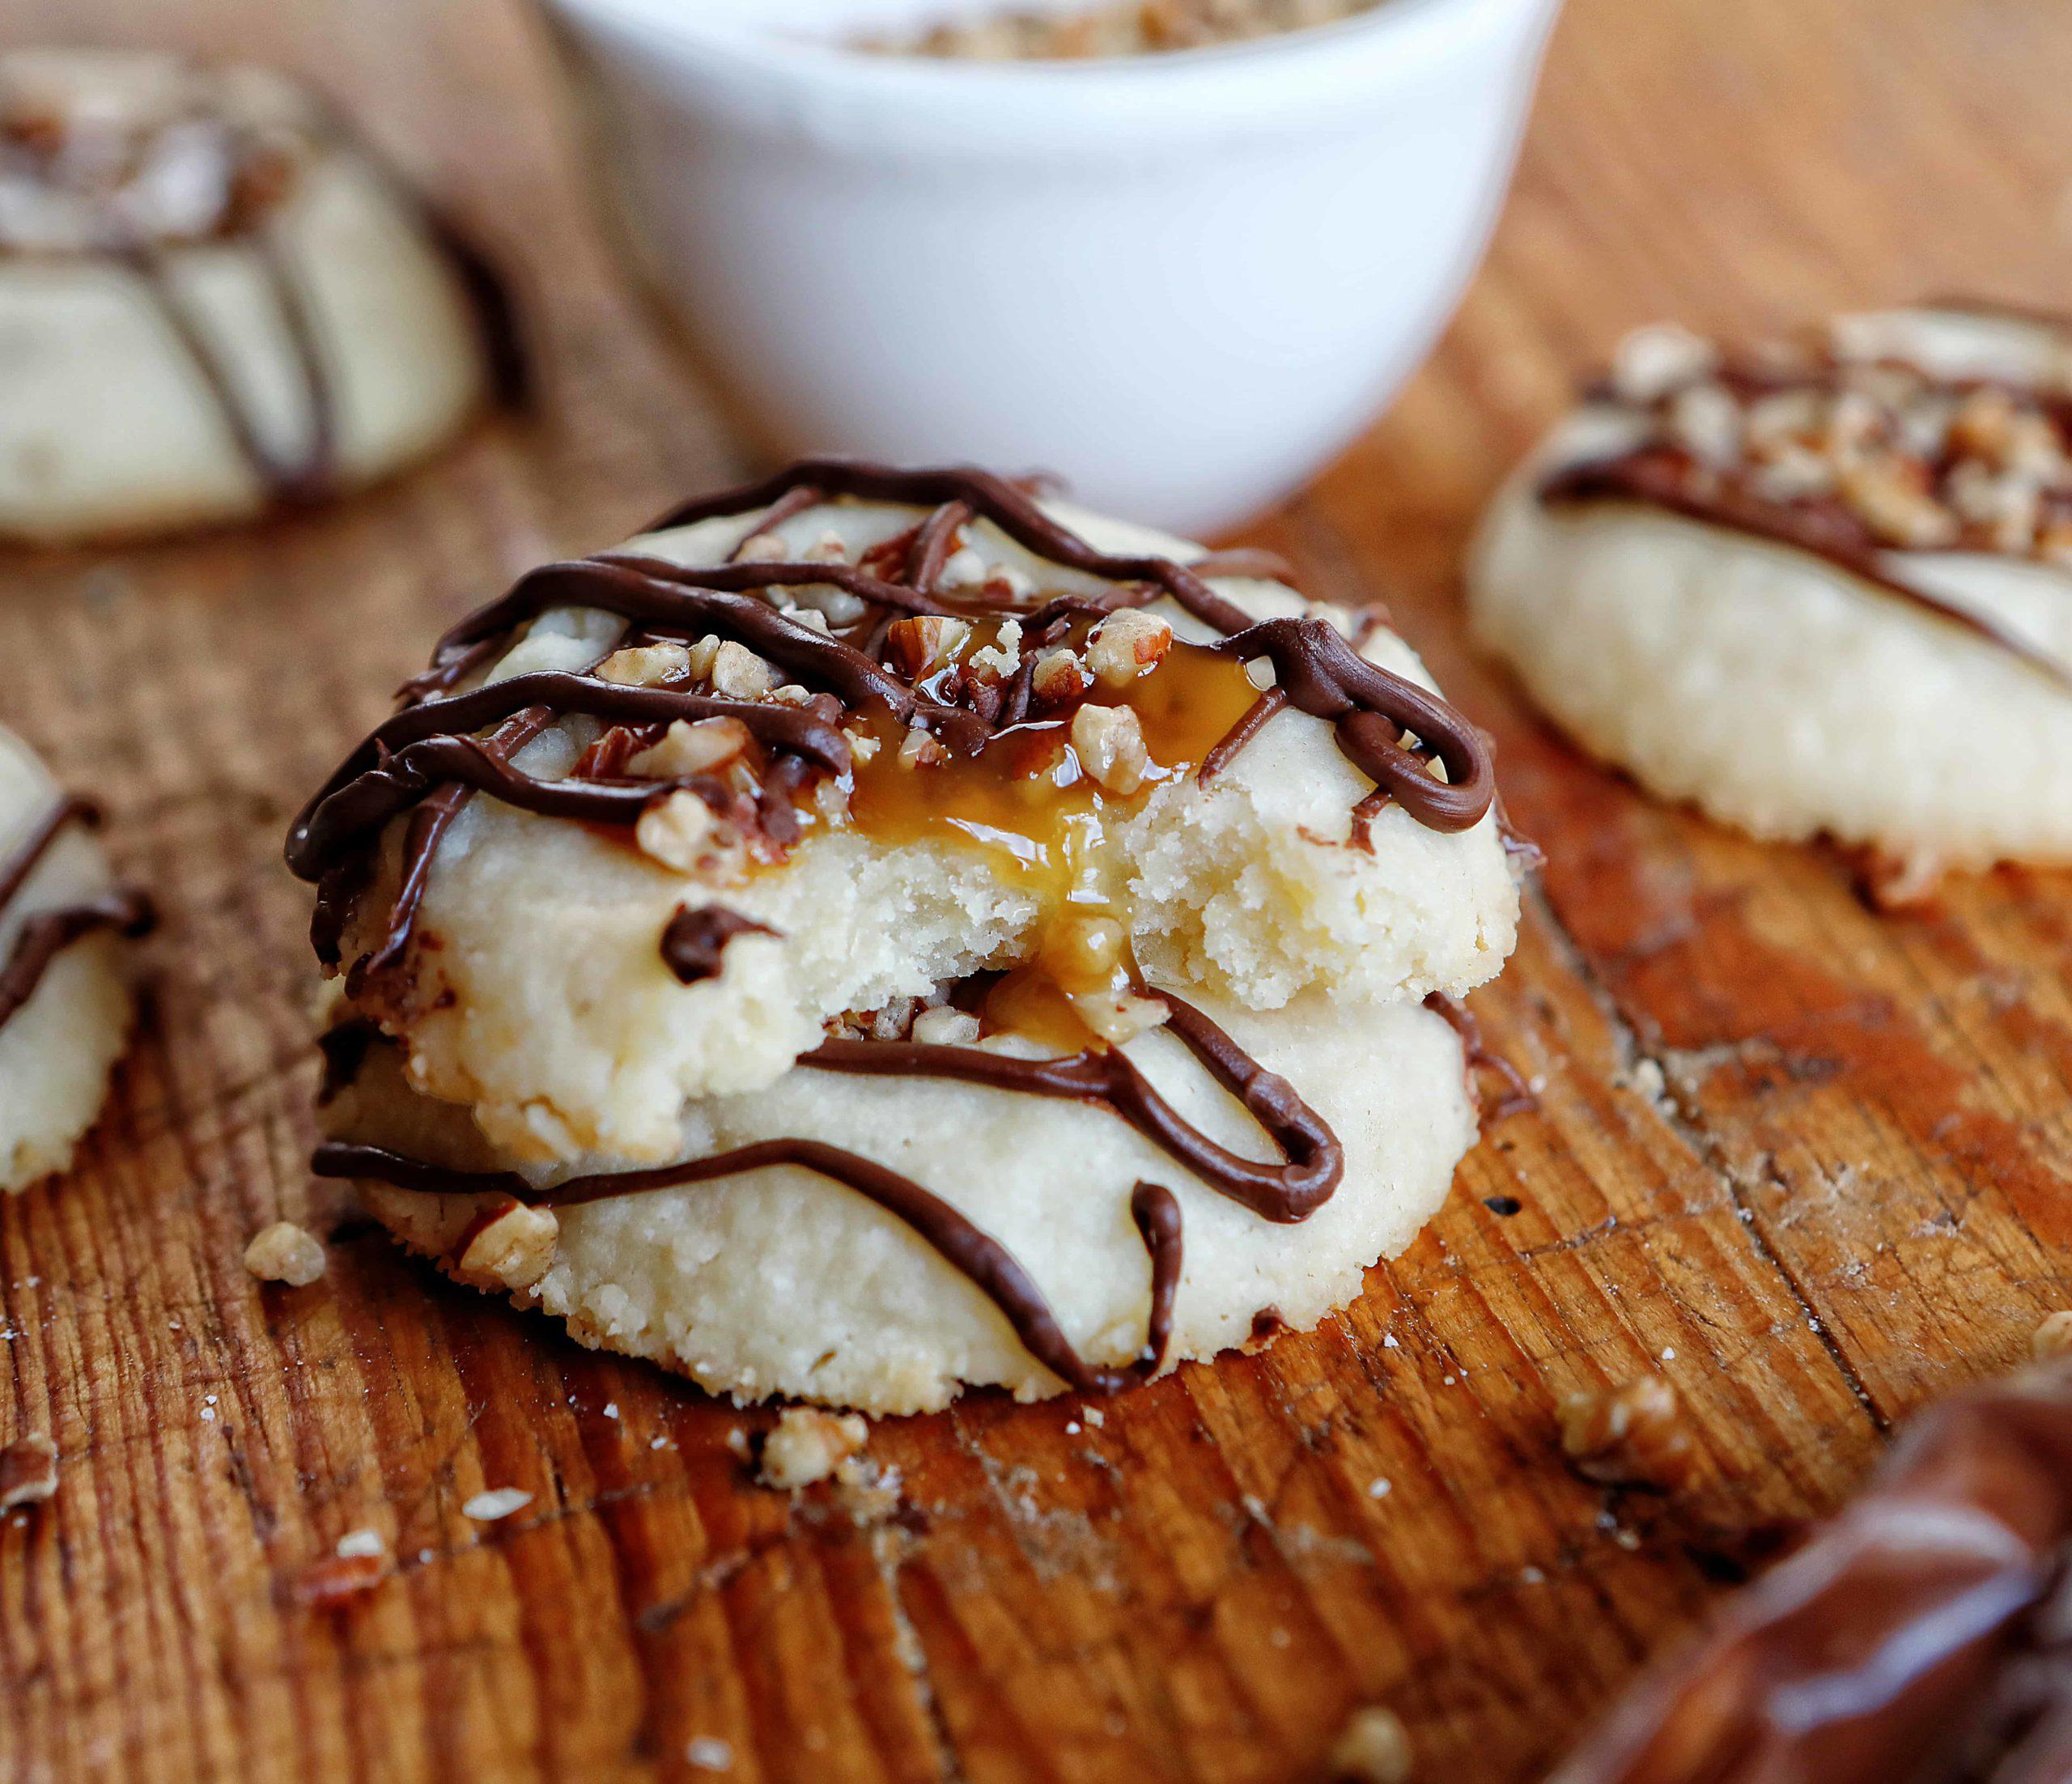 Turtle Thumbprint Cookies with Almonds, Chocolate and Caramel